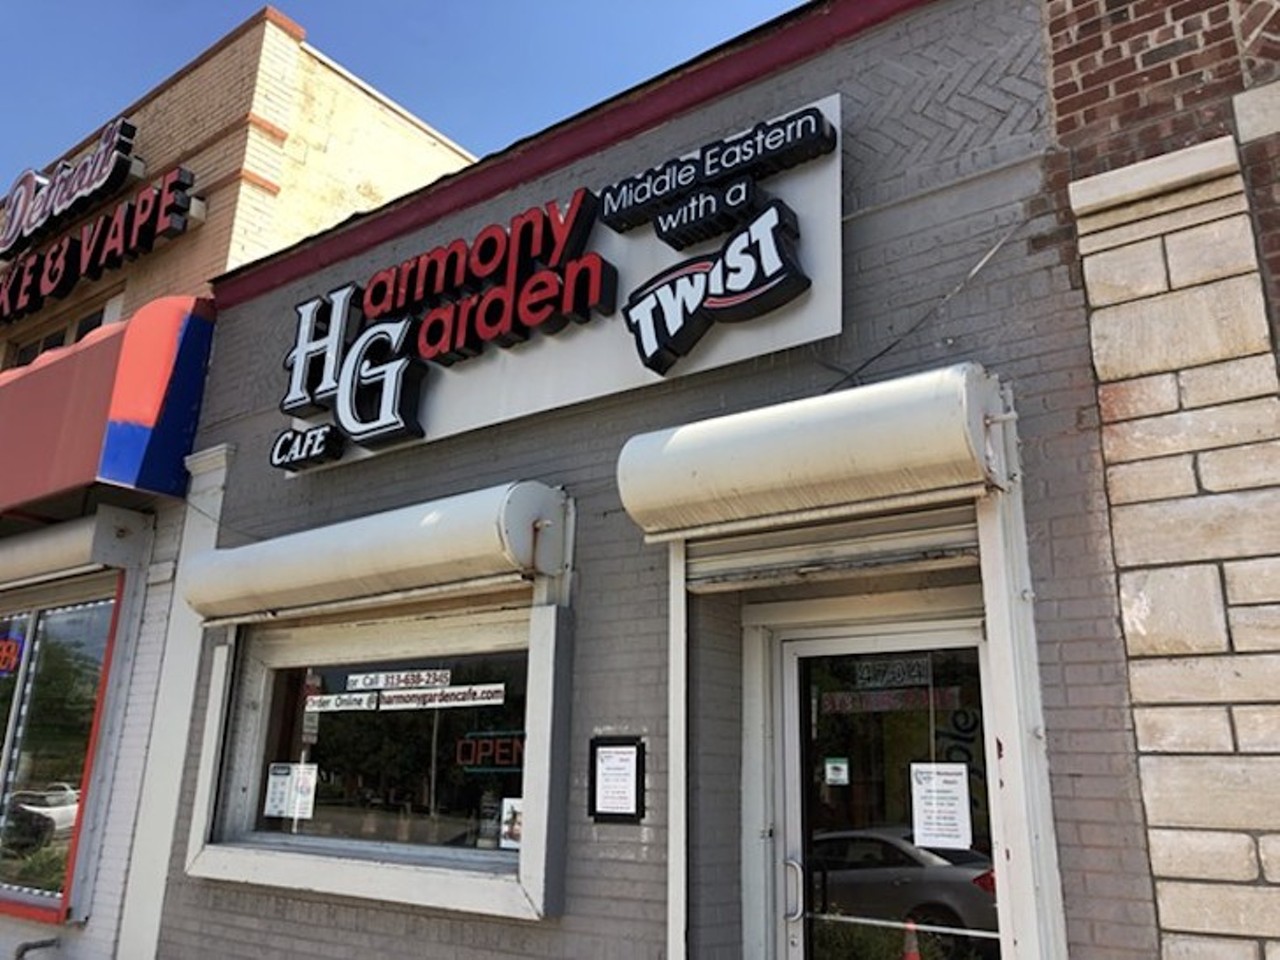 Harmony Garden Cafe
4704 Anthony Wayne Dr., Detroit
After 30 years in business, Harmony Garden closed its doors in July.